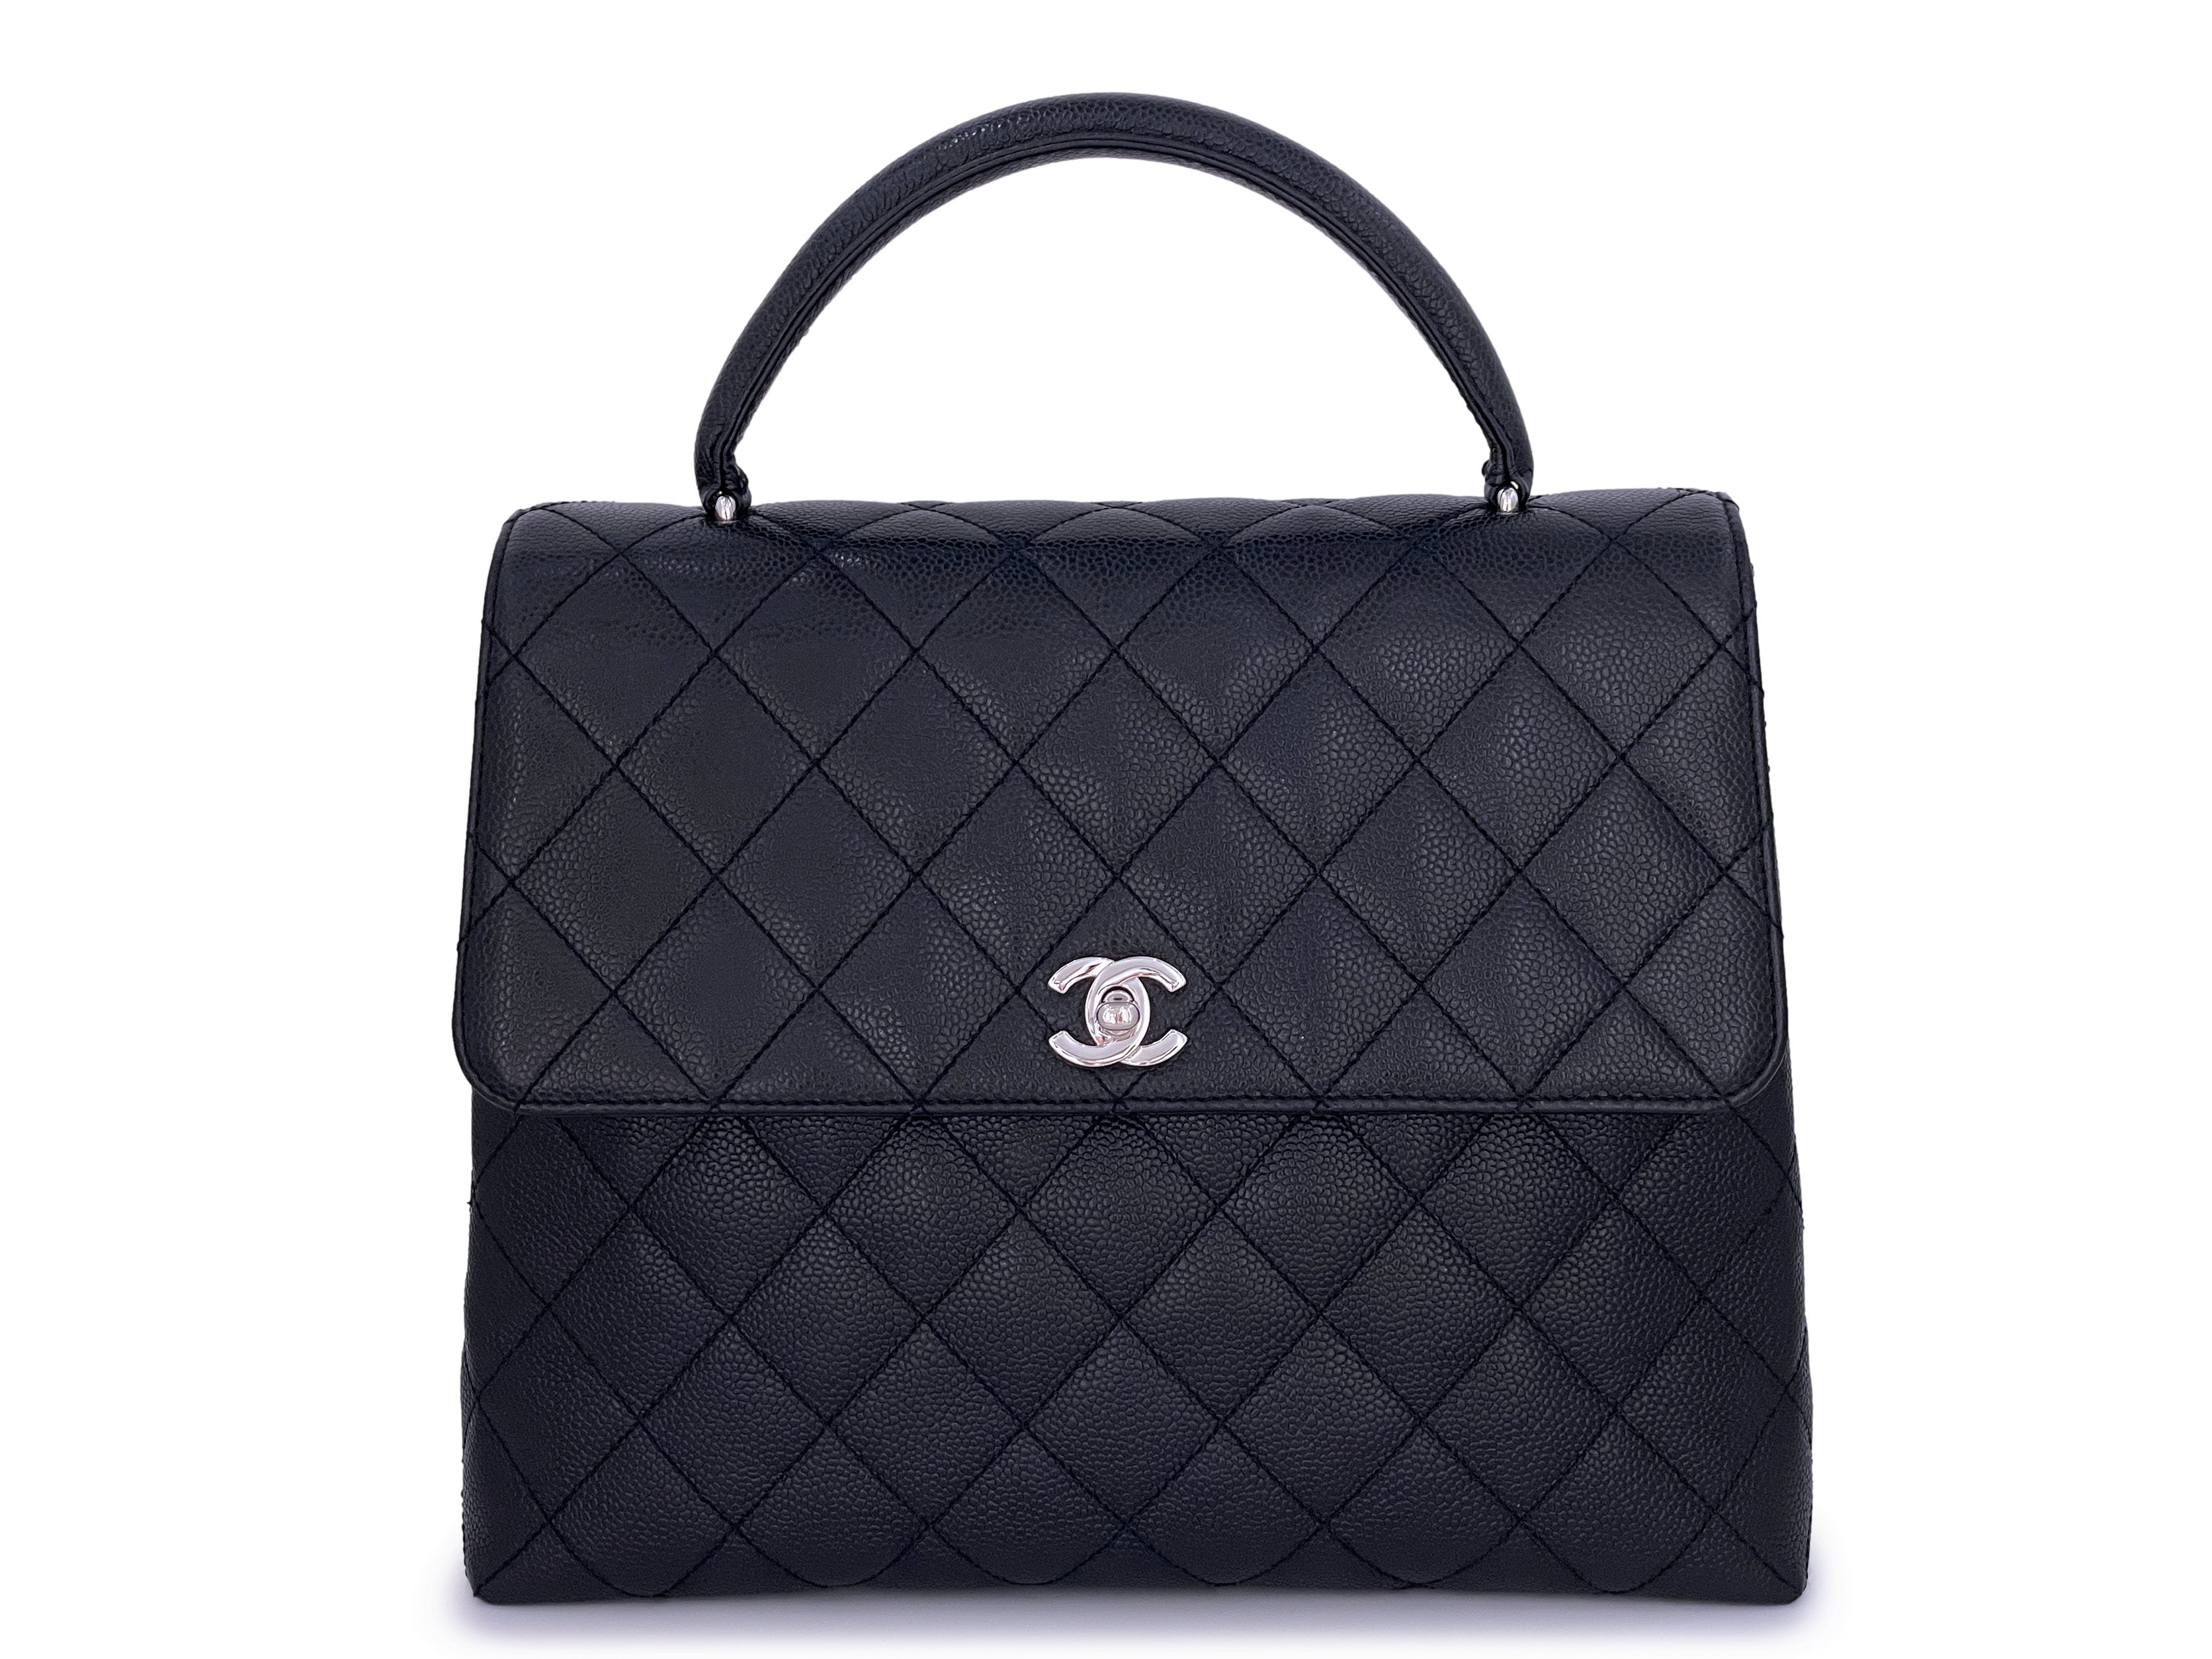 This Vintage Chanel Kelly Wave bag is a highly functional and